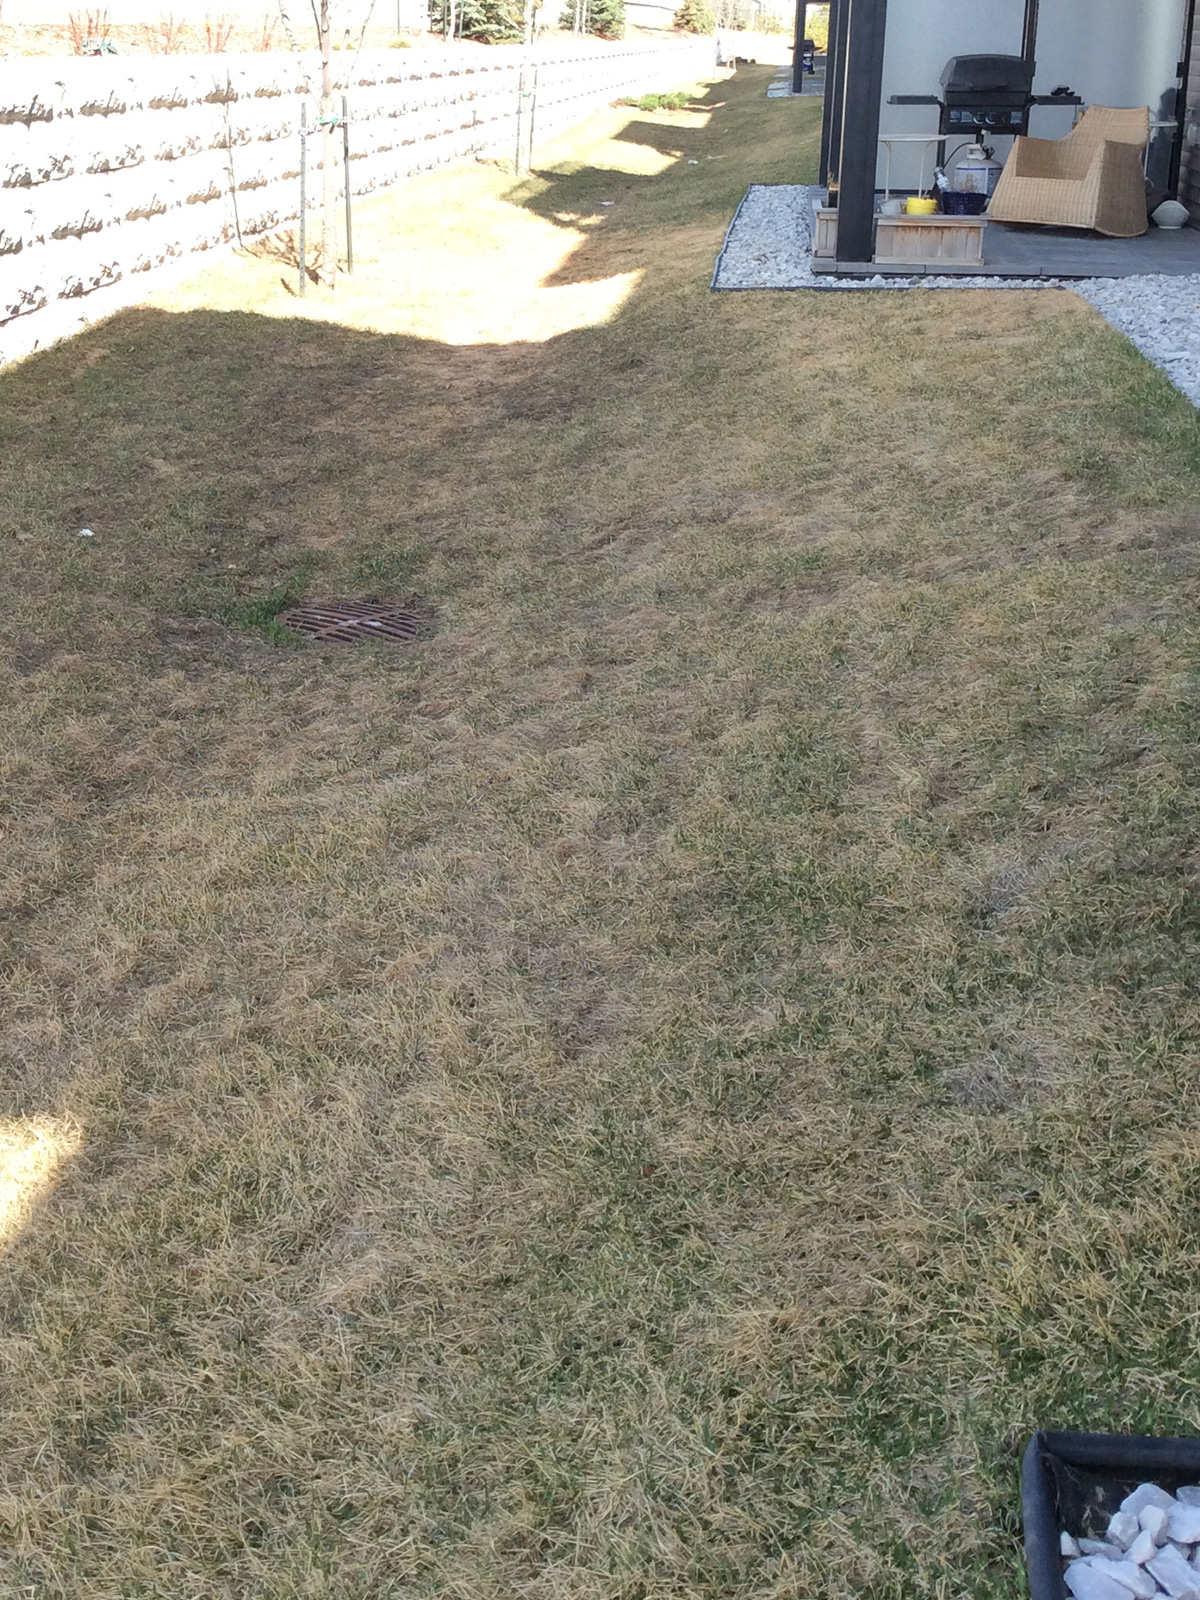 Grass Swale at an Apartment Sloped to Catch Basin